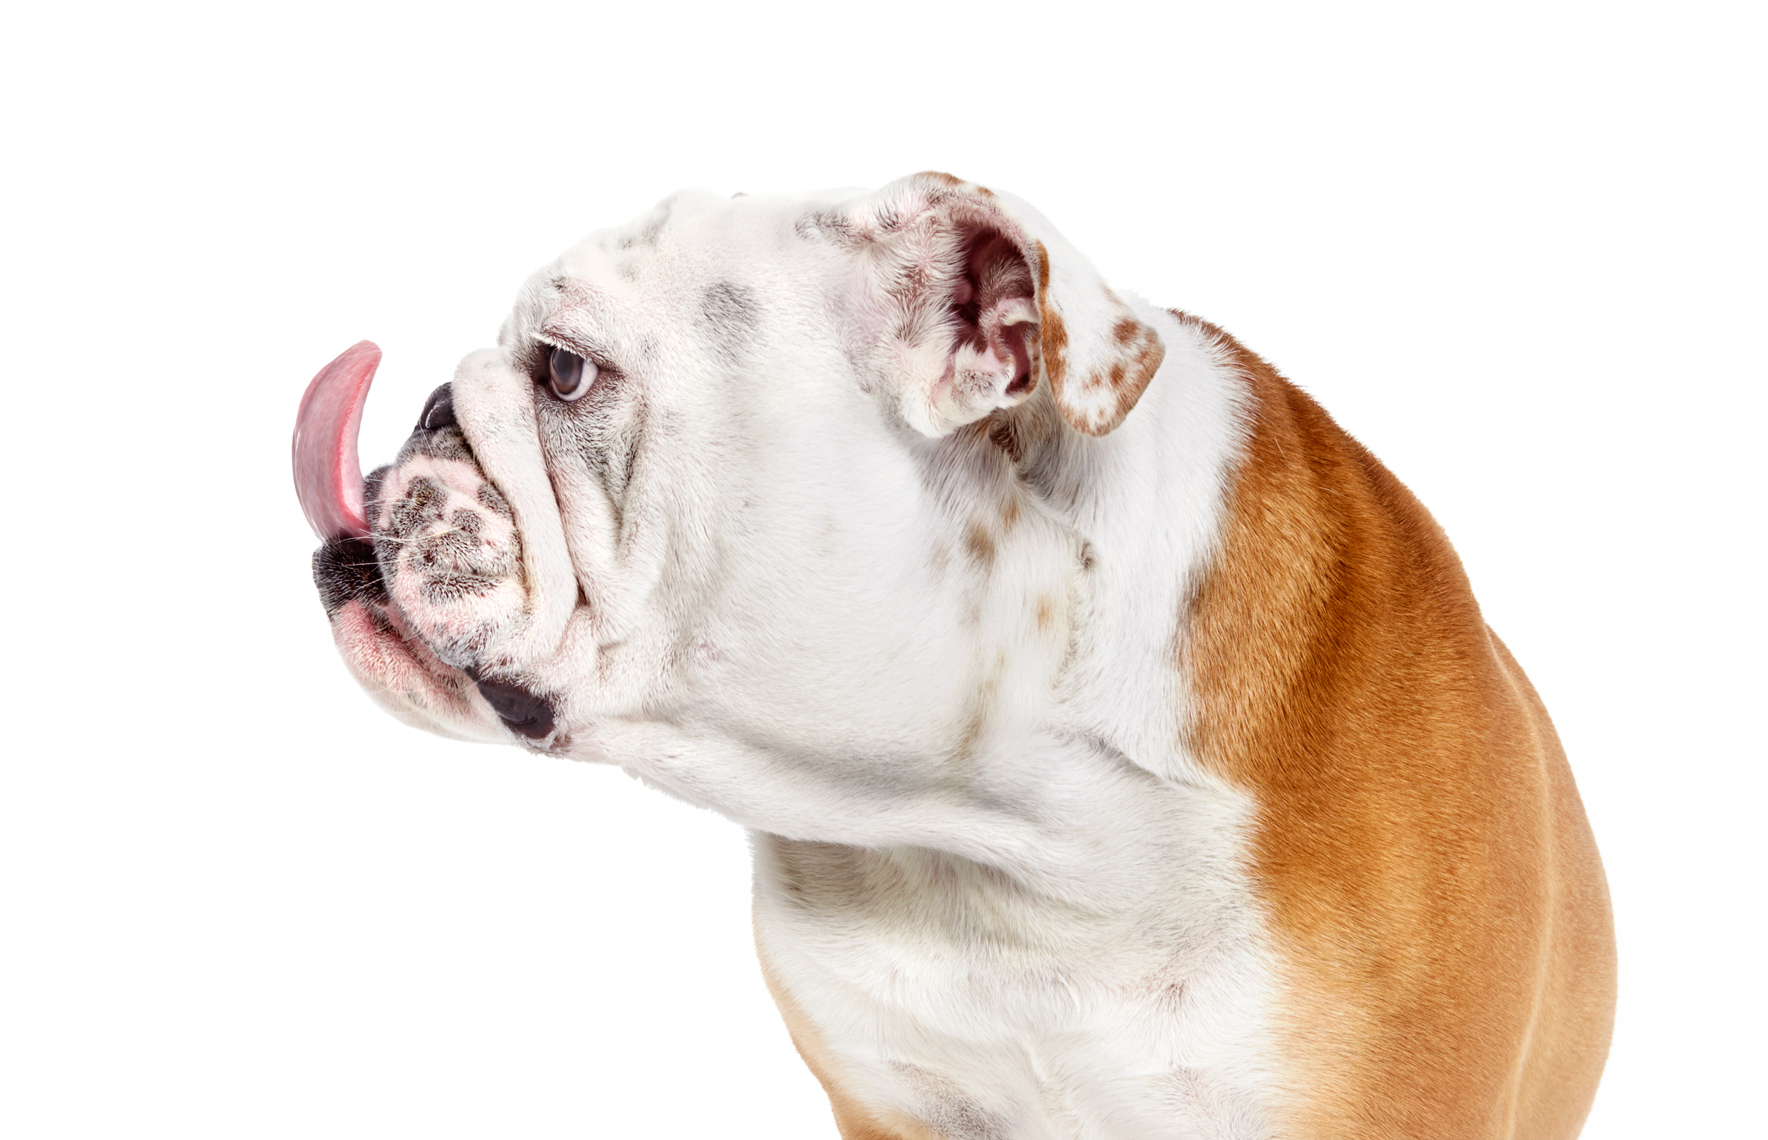 Bulldog profile with tongue out